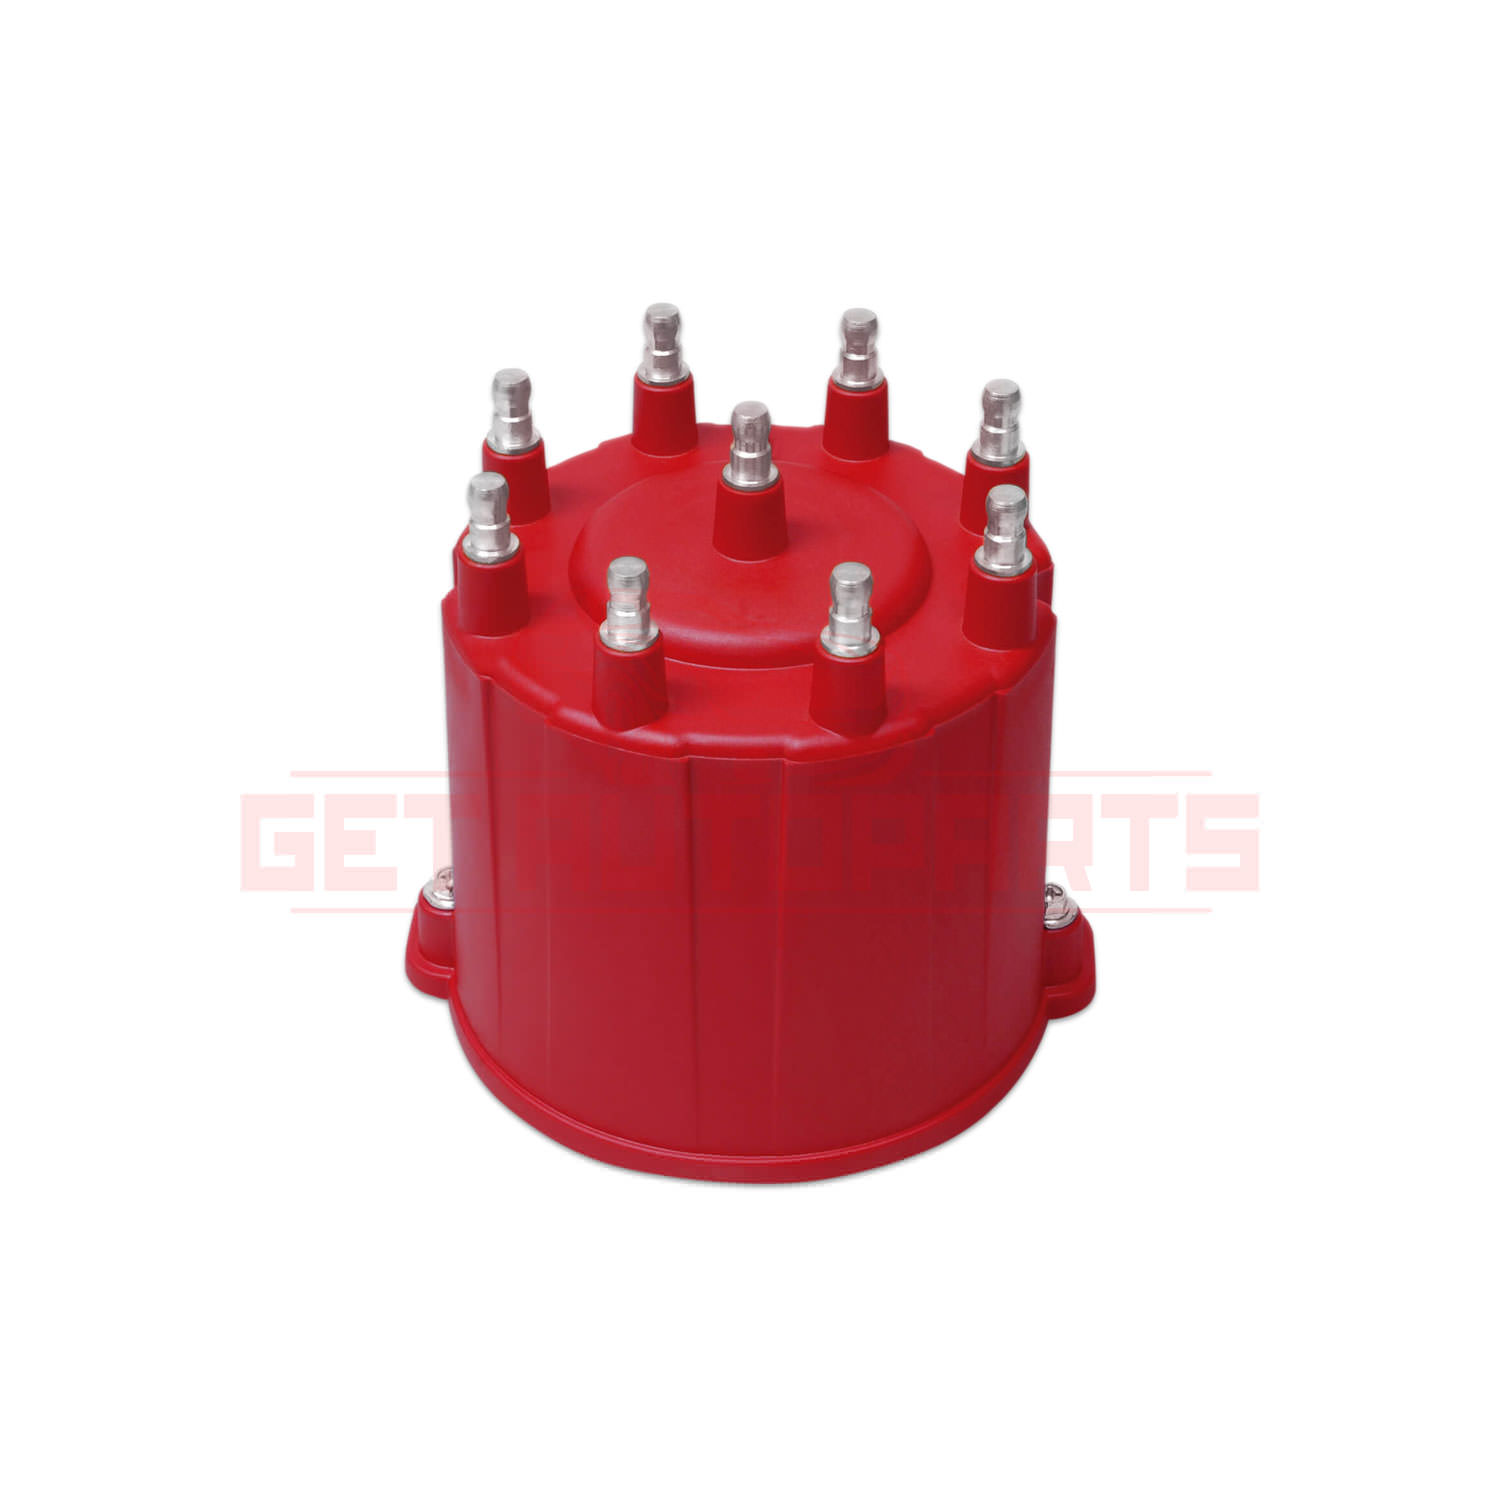 MSD Distributor Cap fits with Chevrolet 1975-1986 C10